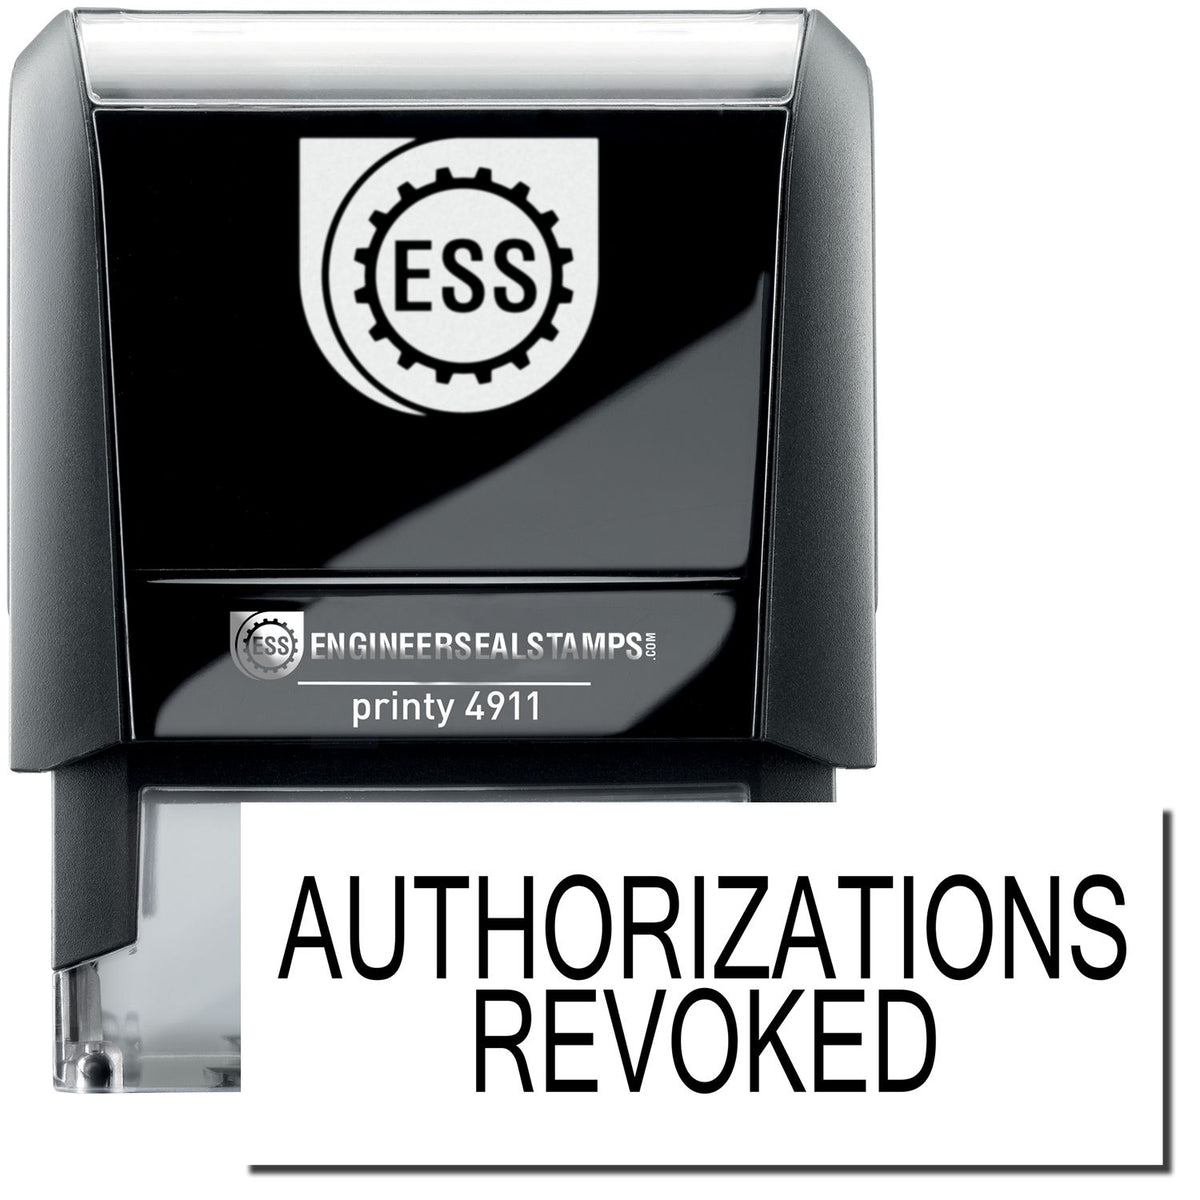 A self-inking stamp with a stamped image showing how the text &quot;AUTHORIZATIONS REVOKED&quot; is displayed after stamping.